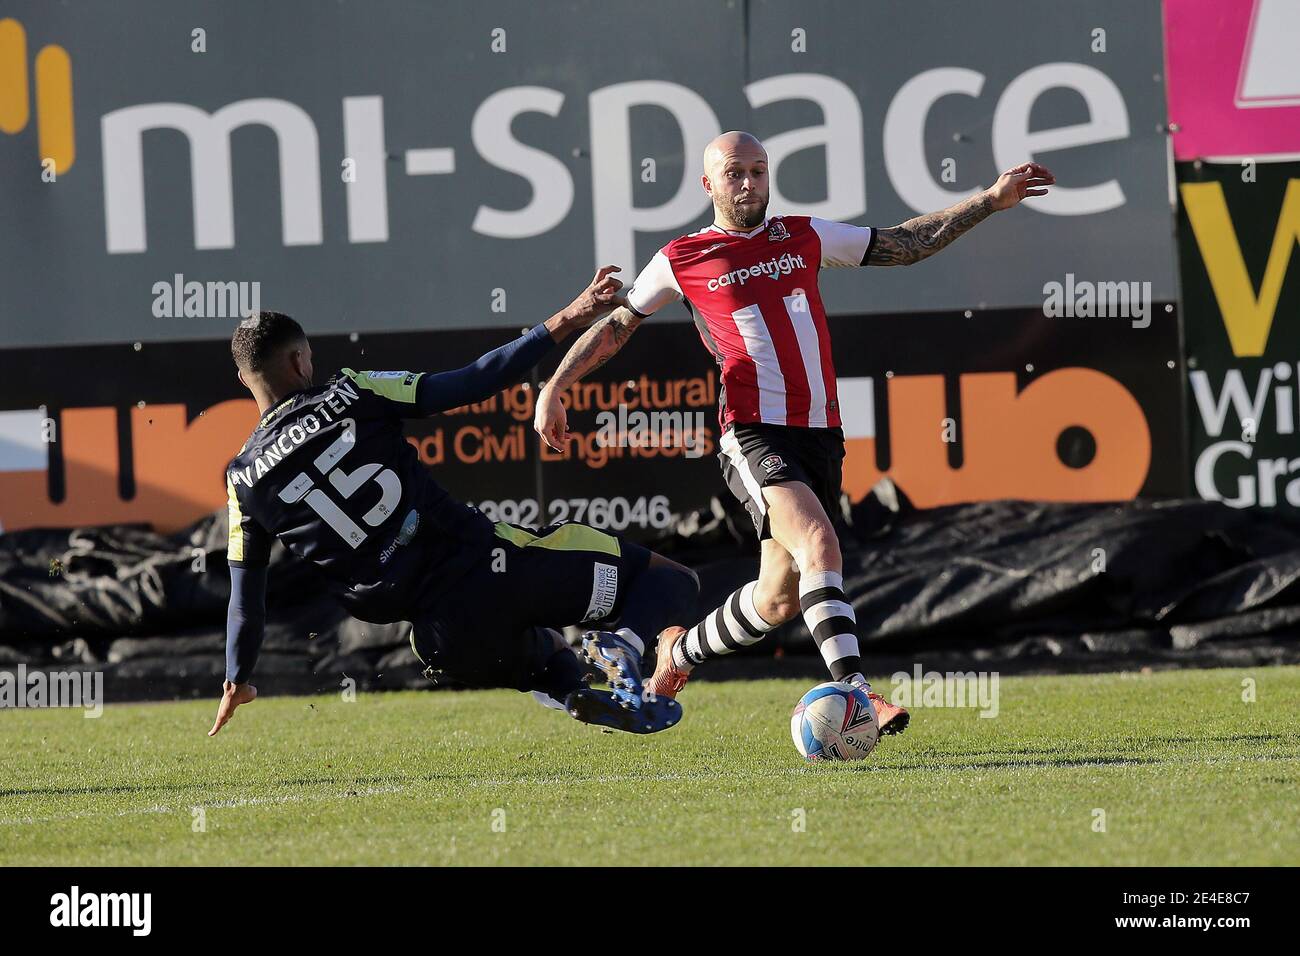 Exeter, UK. 23rd Jan, 2021. Nicky Law of Exeter City and Terence Vancooten of Stevenage during the Sky Bet League 2 behind closed doors match between Exeter City and Stevenage at St James' Park, Exeter, England on 23 January 2021. Photo by Dave Peters/PRiME Media Images. Credit: PRiME Media Images/Alamy Live News Stock Photo